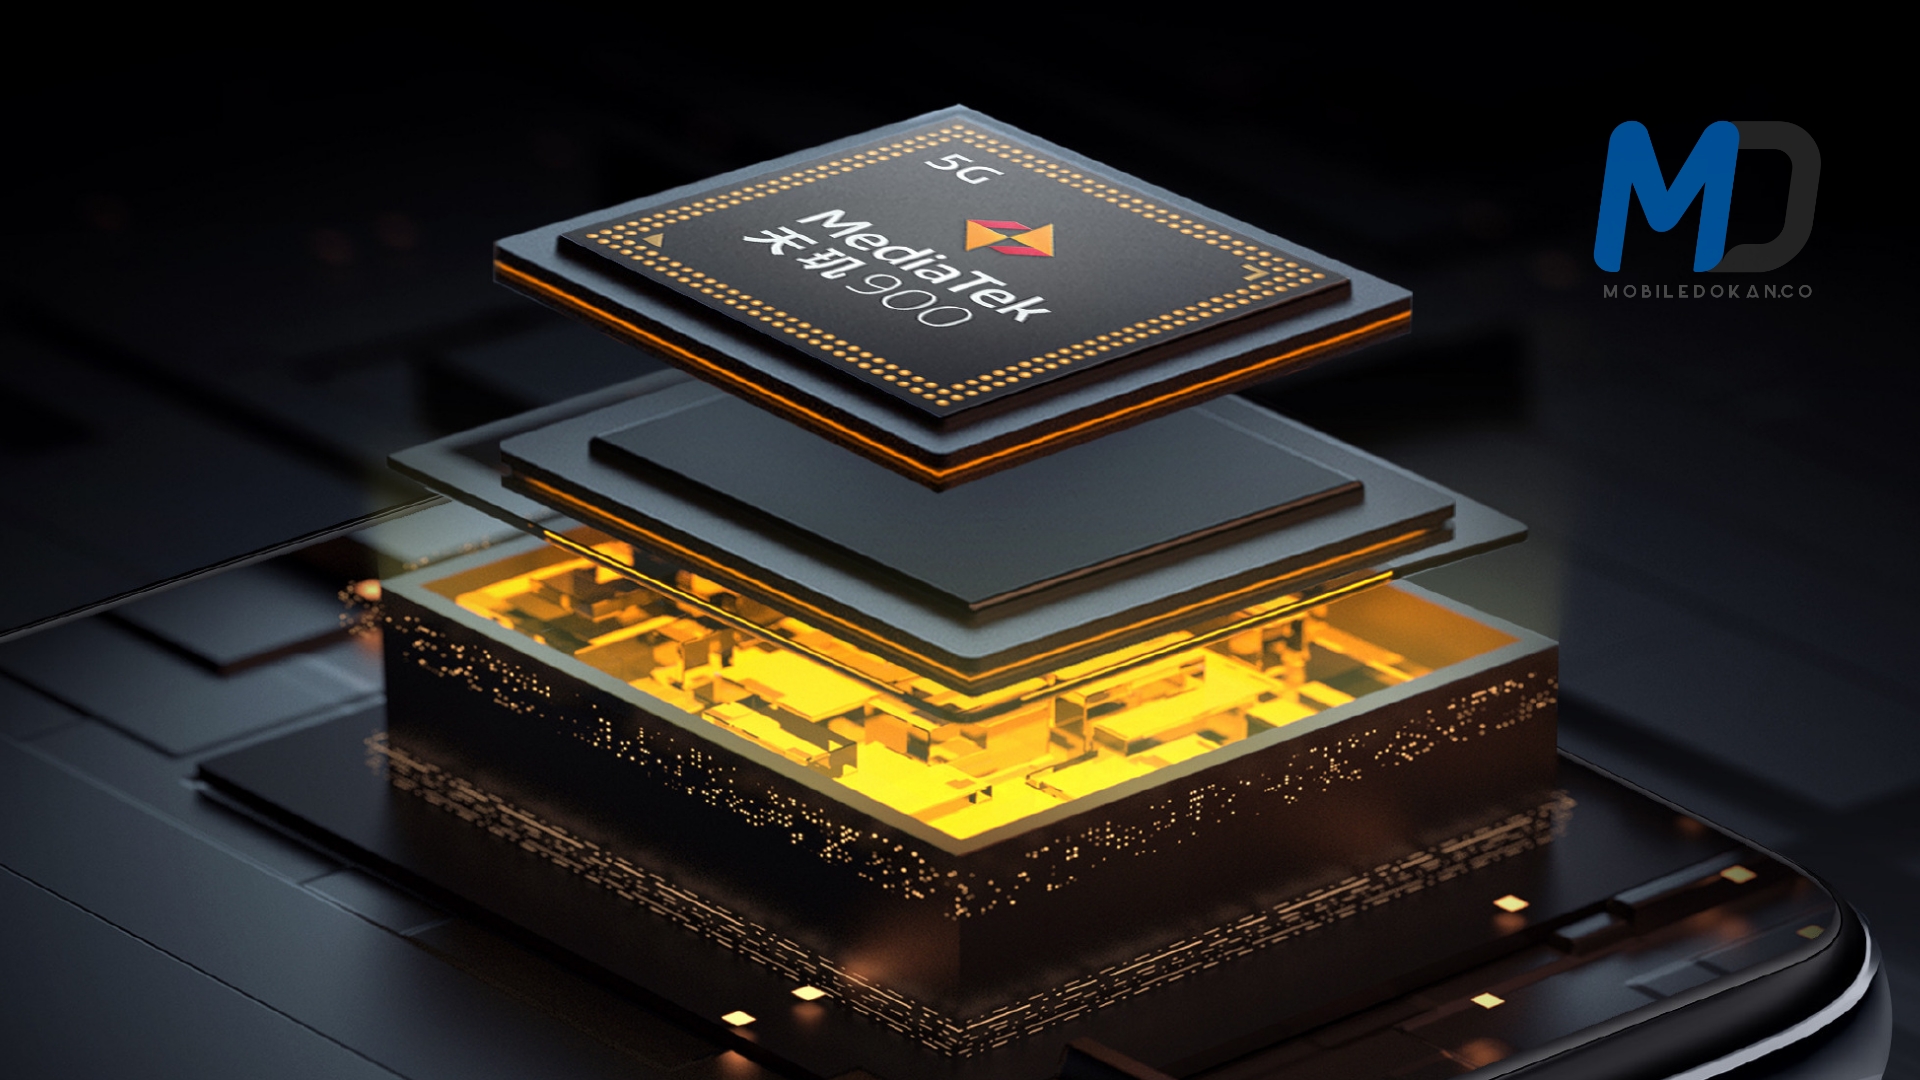 iQOO Z5x announced to come powered by MediaTek